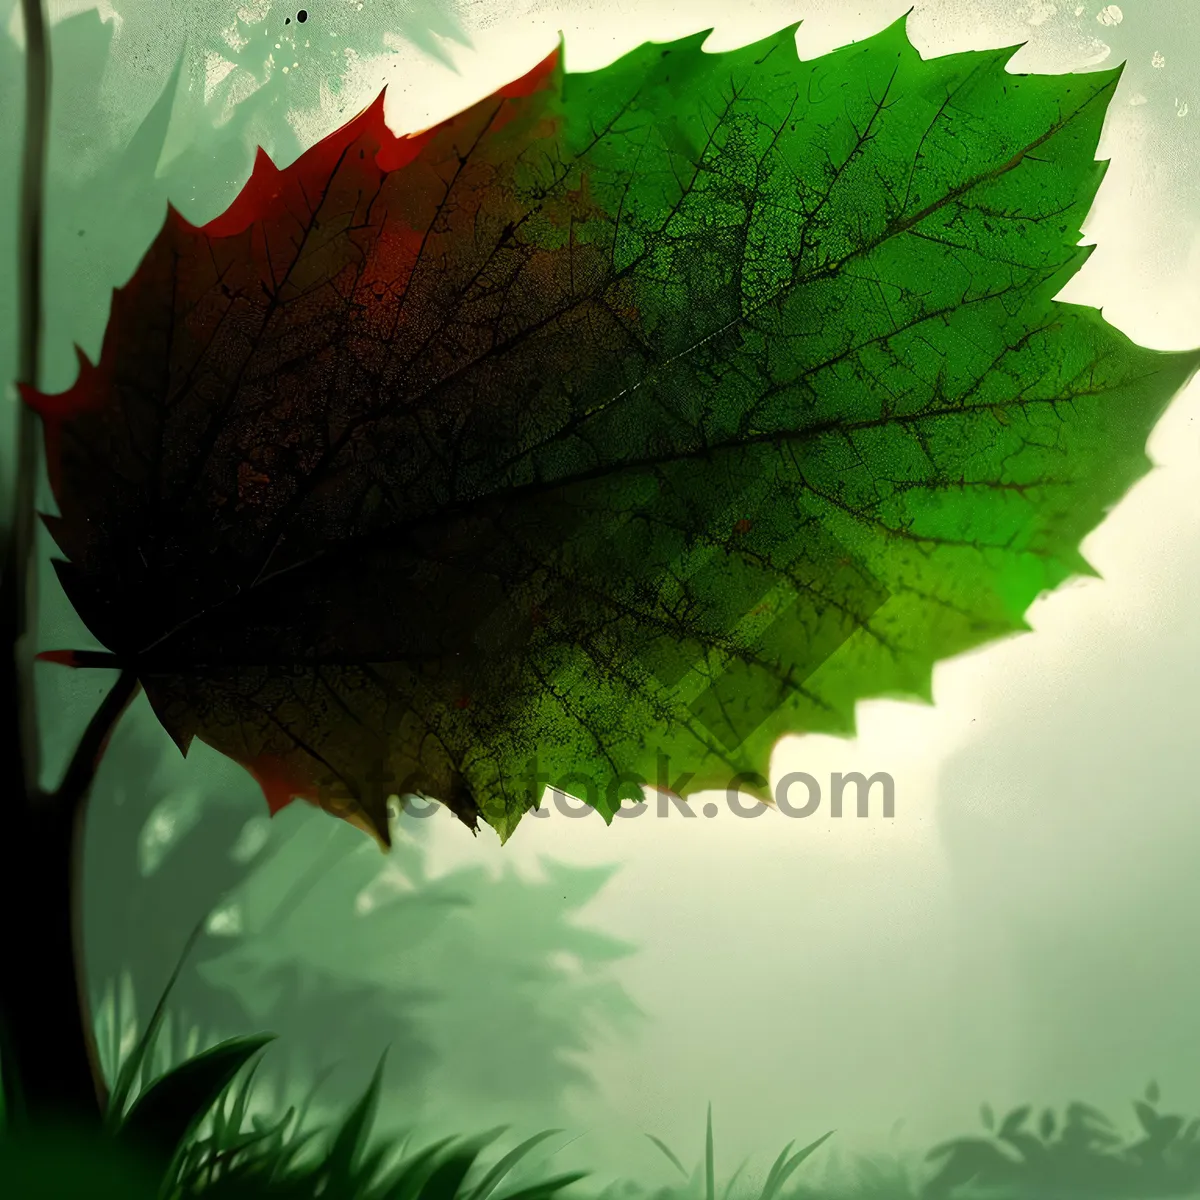 Picture of Vibrant Maple Leaf in Autumn Forest